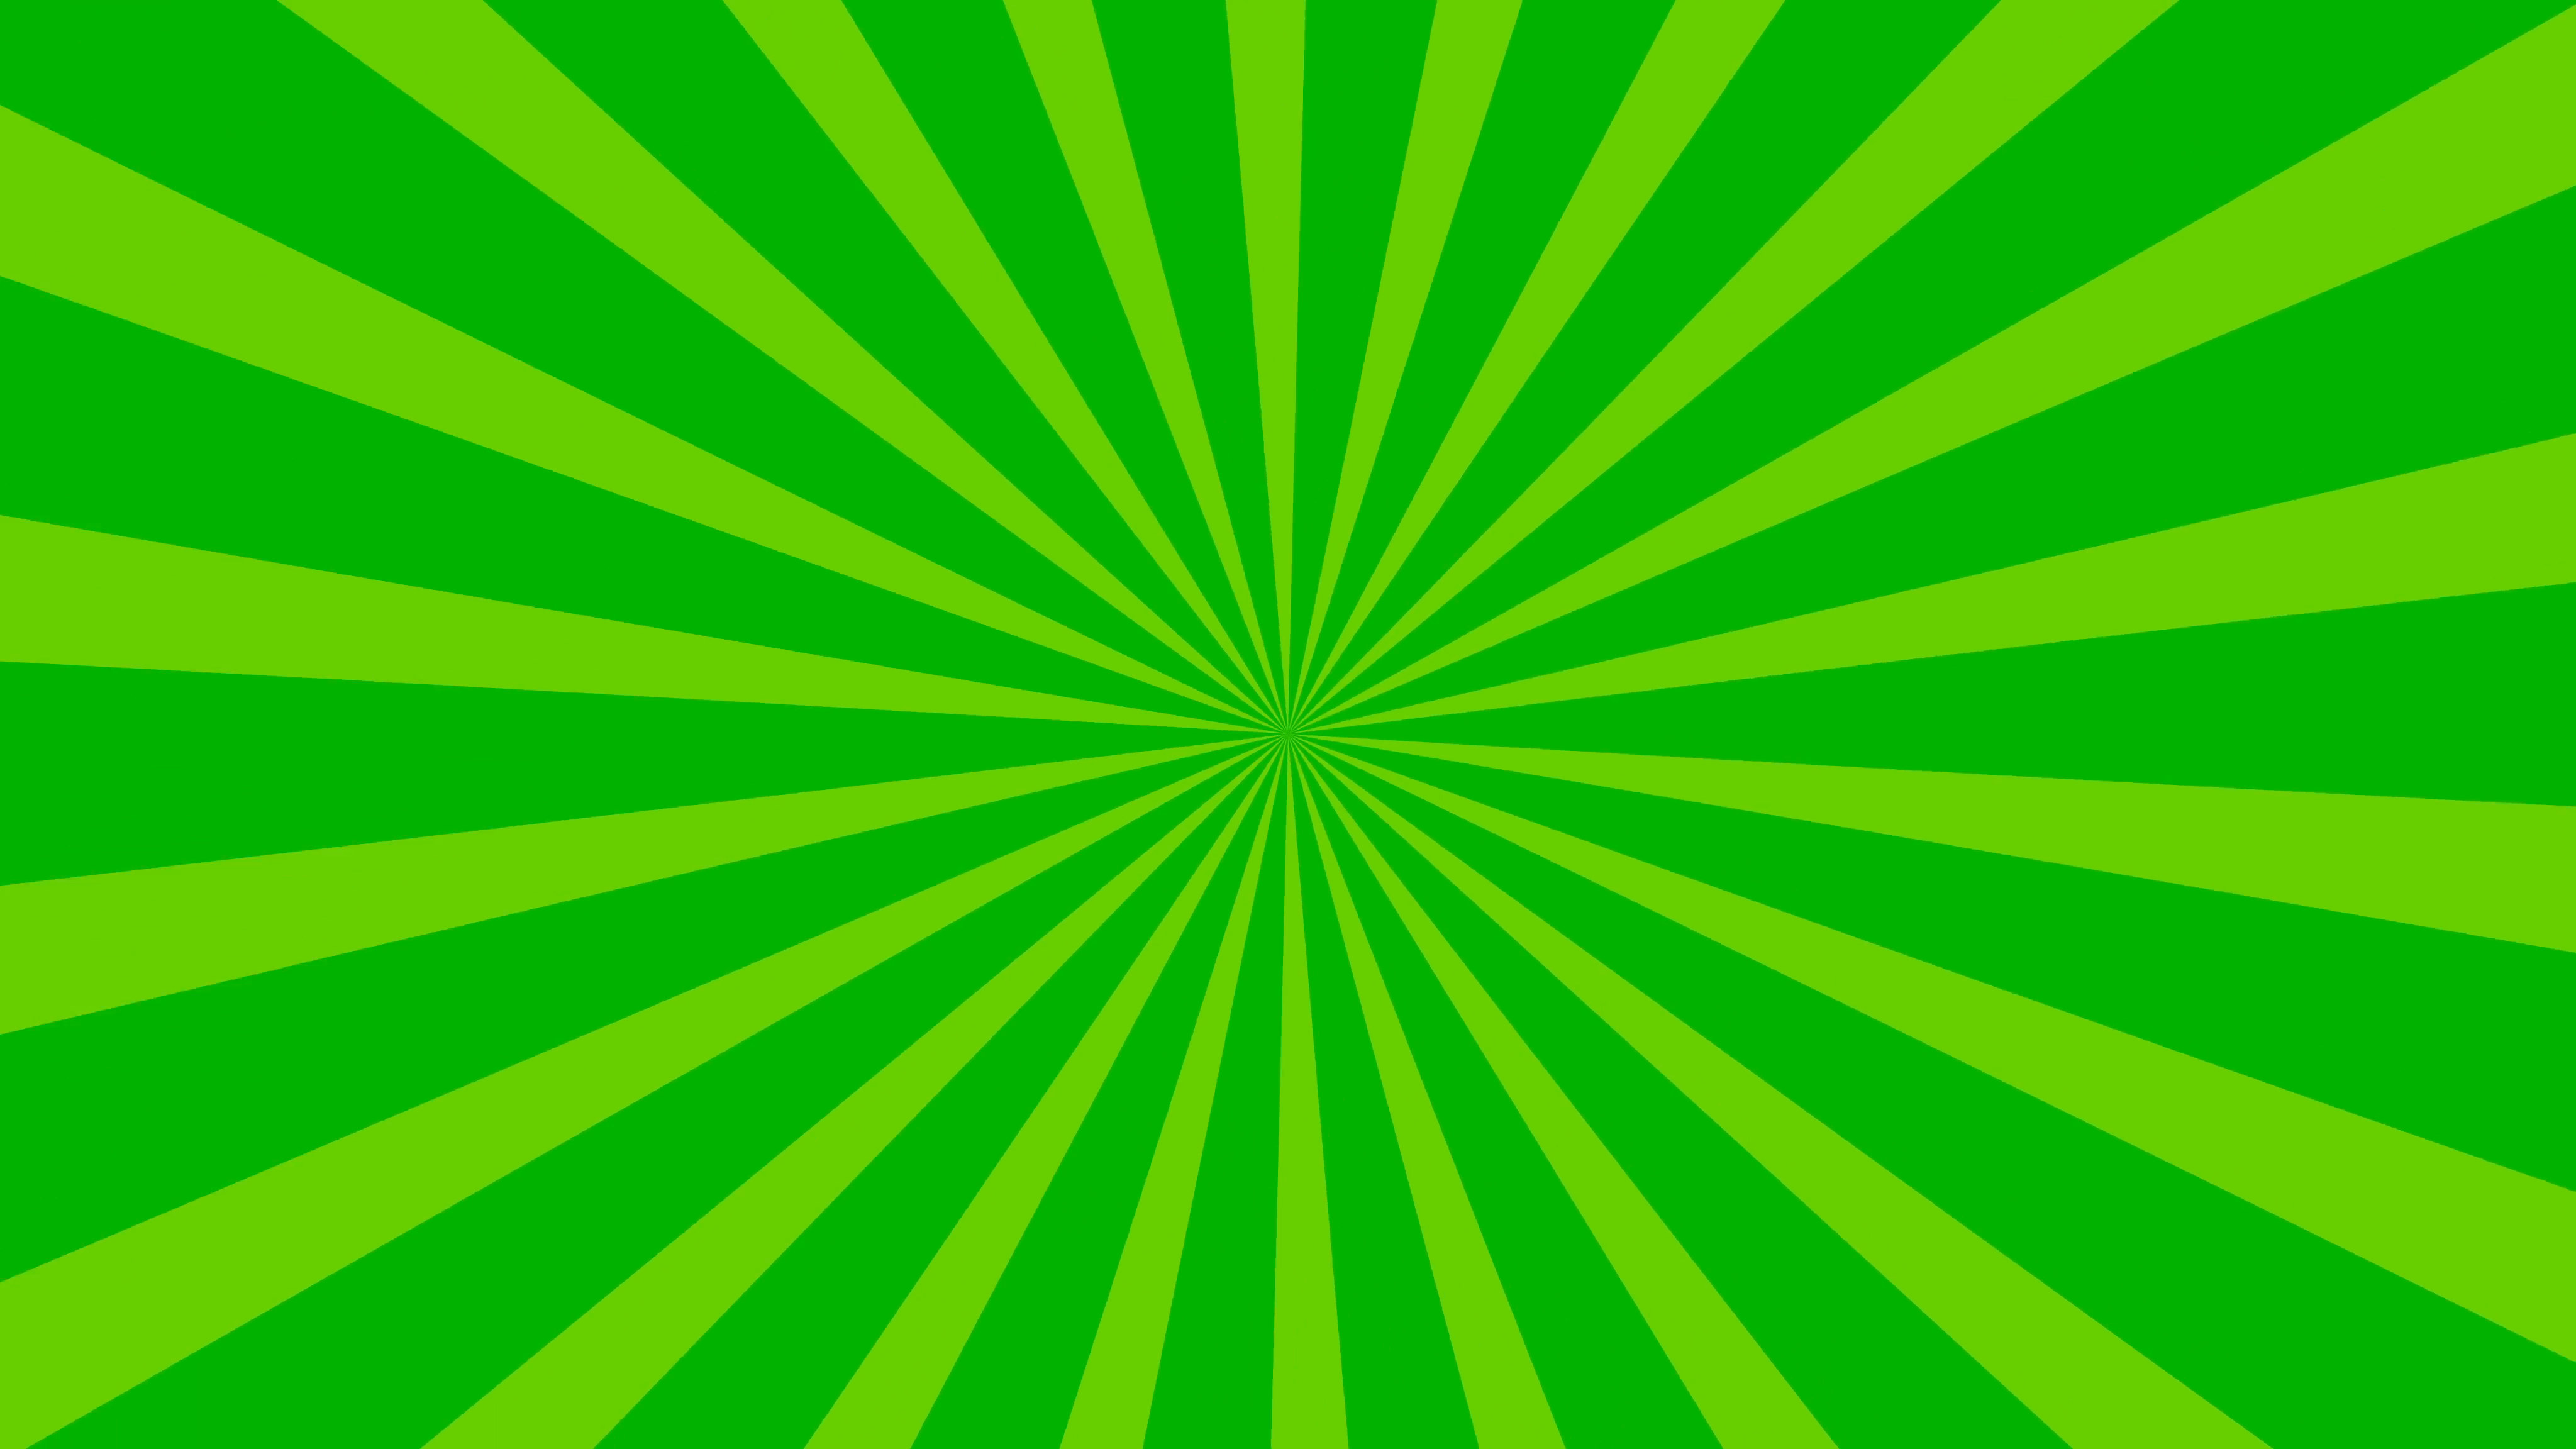 Traditional and classic Sunburst or Starburst background Green 4K